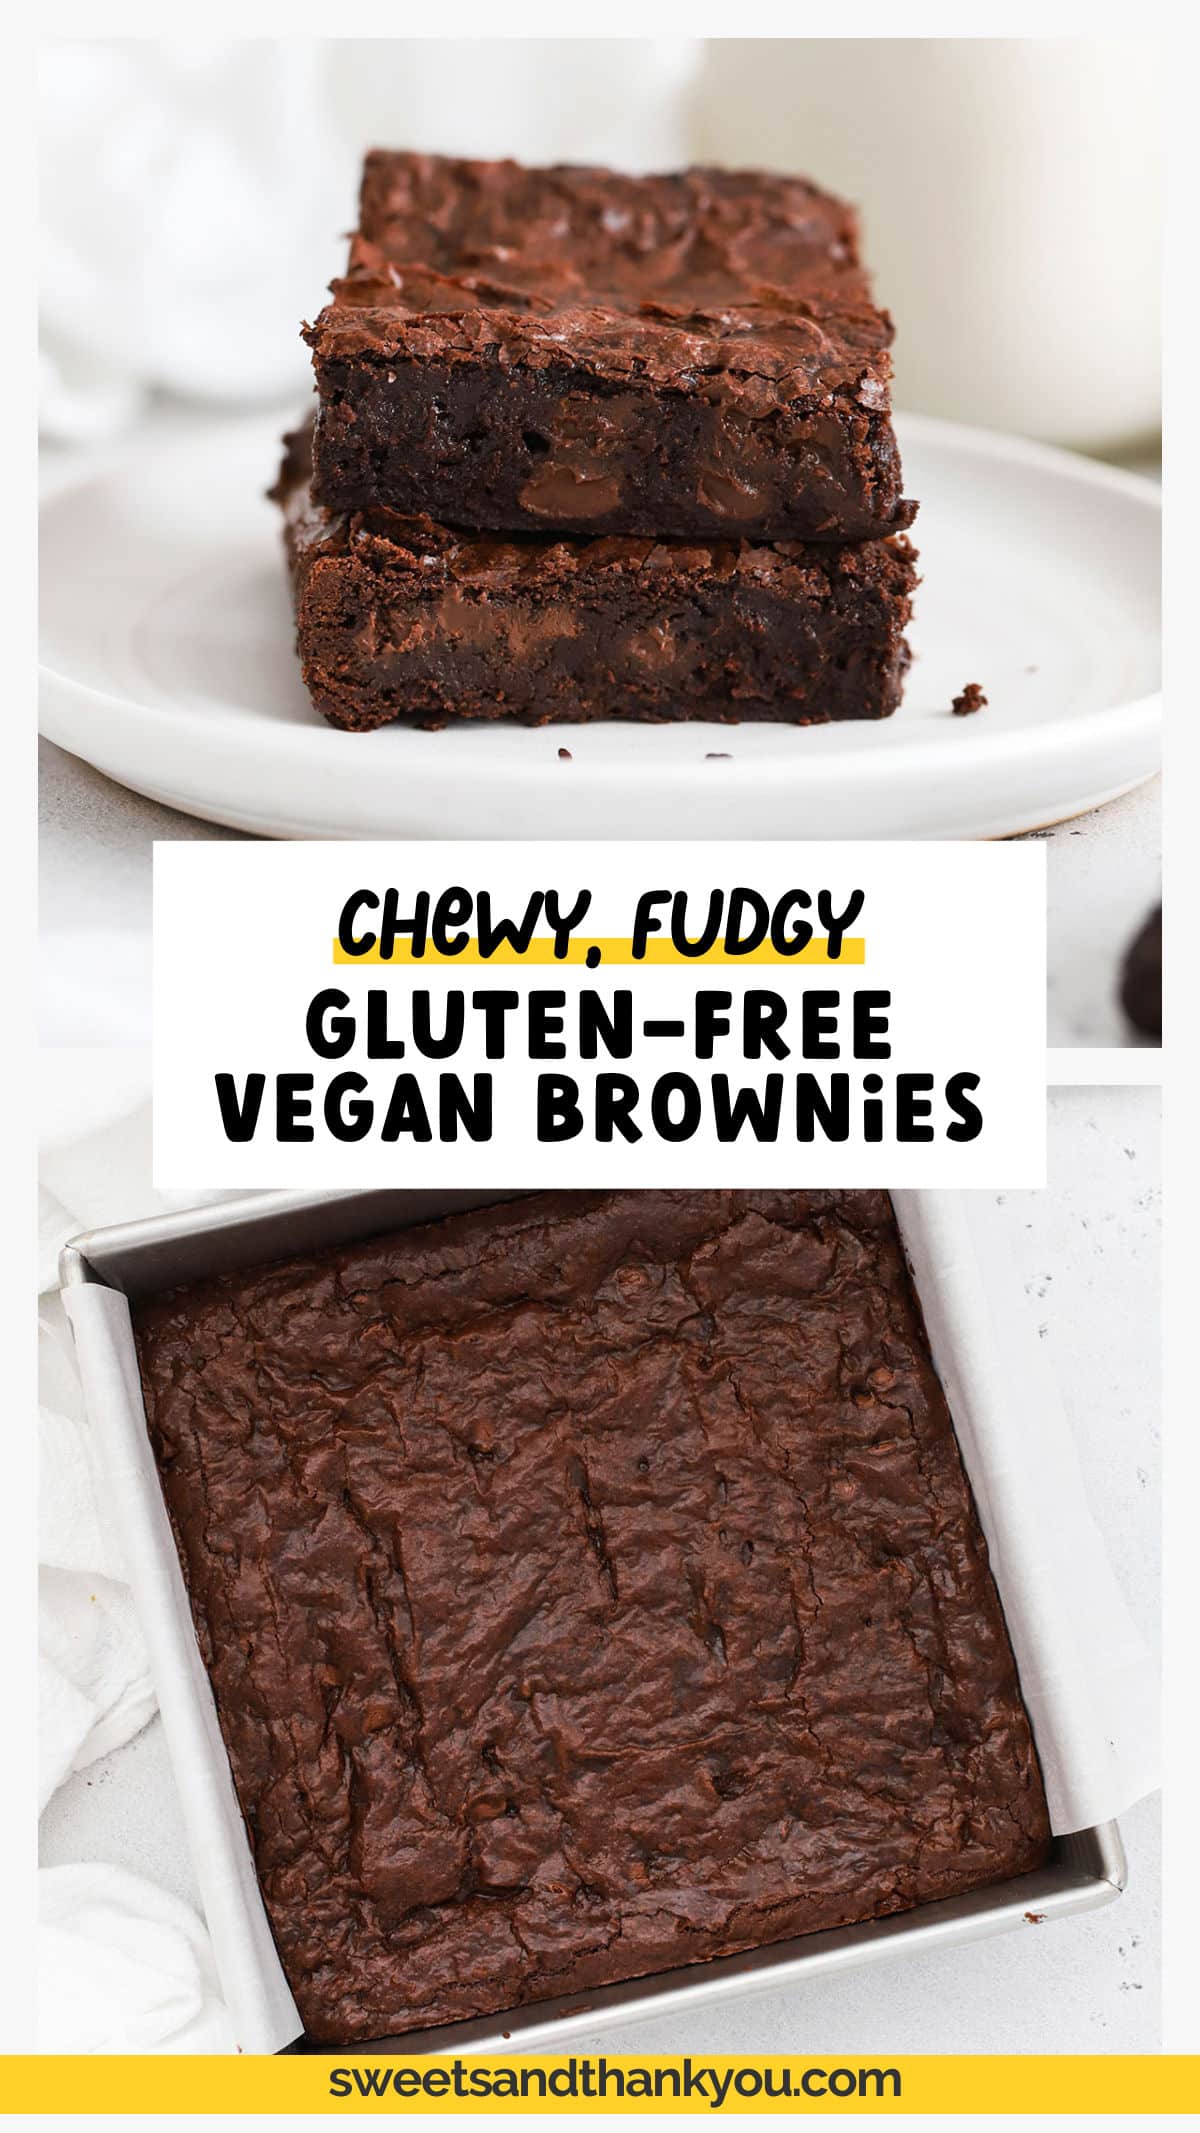 These Gluten-Free Vegan Brownies are fudgy, chocolatey, and have the fudgy centers and signature glossy top that you crave. What makes this recipe special is that our vegan brownies are made without flax eggs, aquafaba, chia eggs, or another weird egg substitutes. Instead, we rely on simple ingredients & a few brownie techniques that give you beautiful, fudgy results every time. Get the recipe & all our brownie baking tips at sweetsandthankyou.com